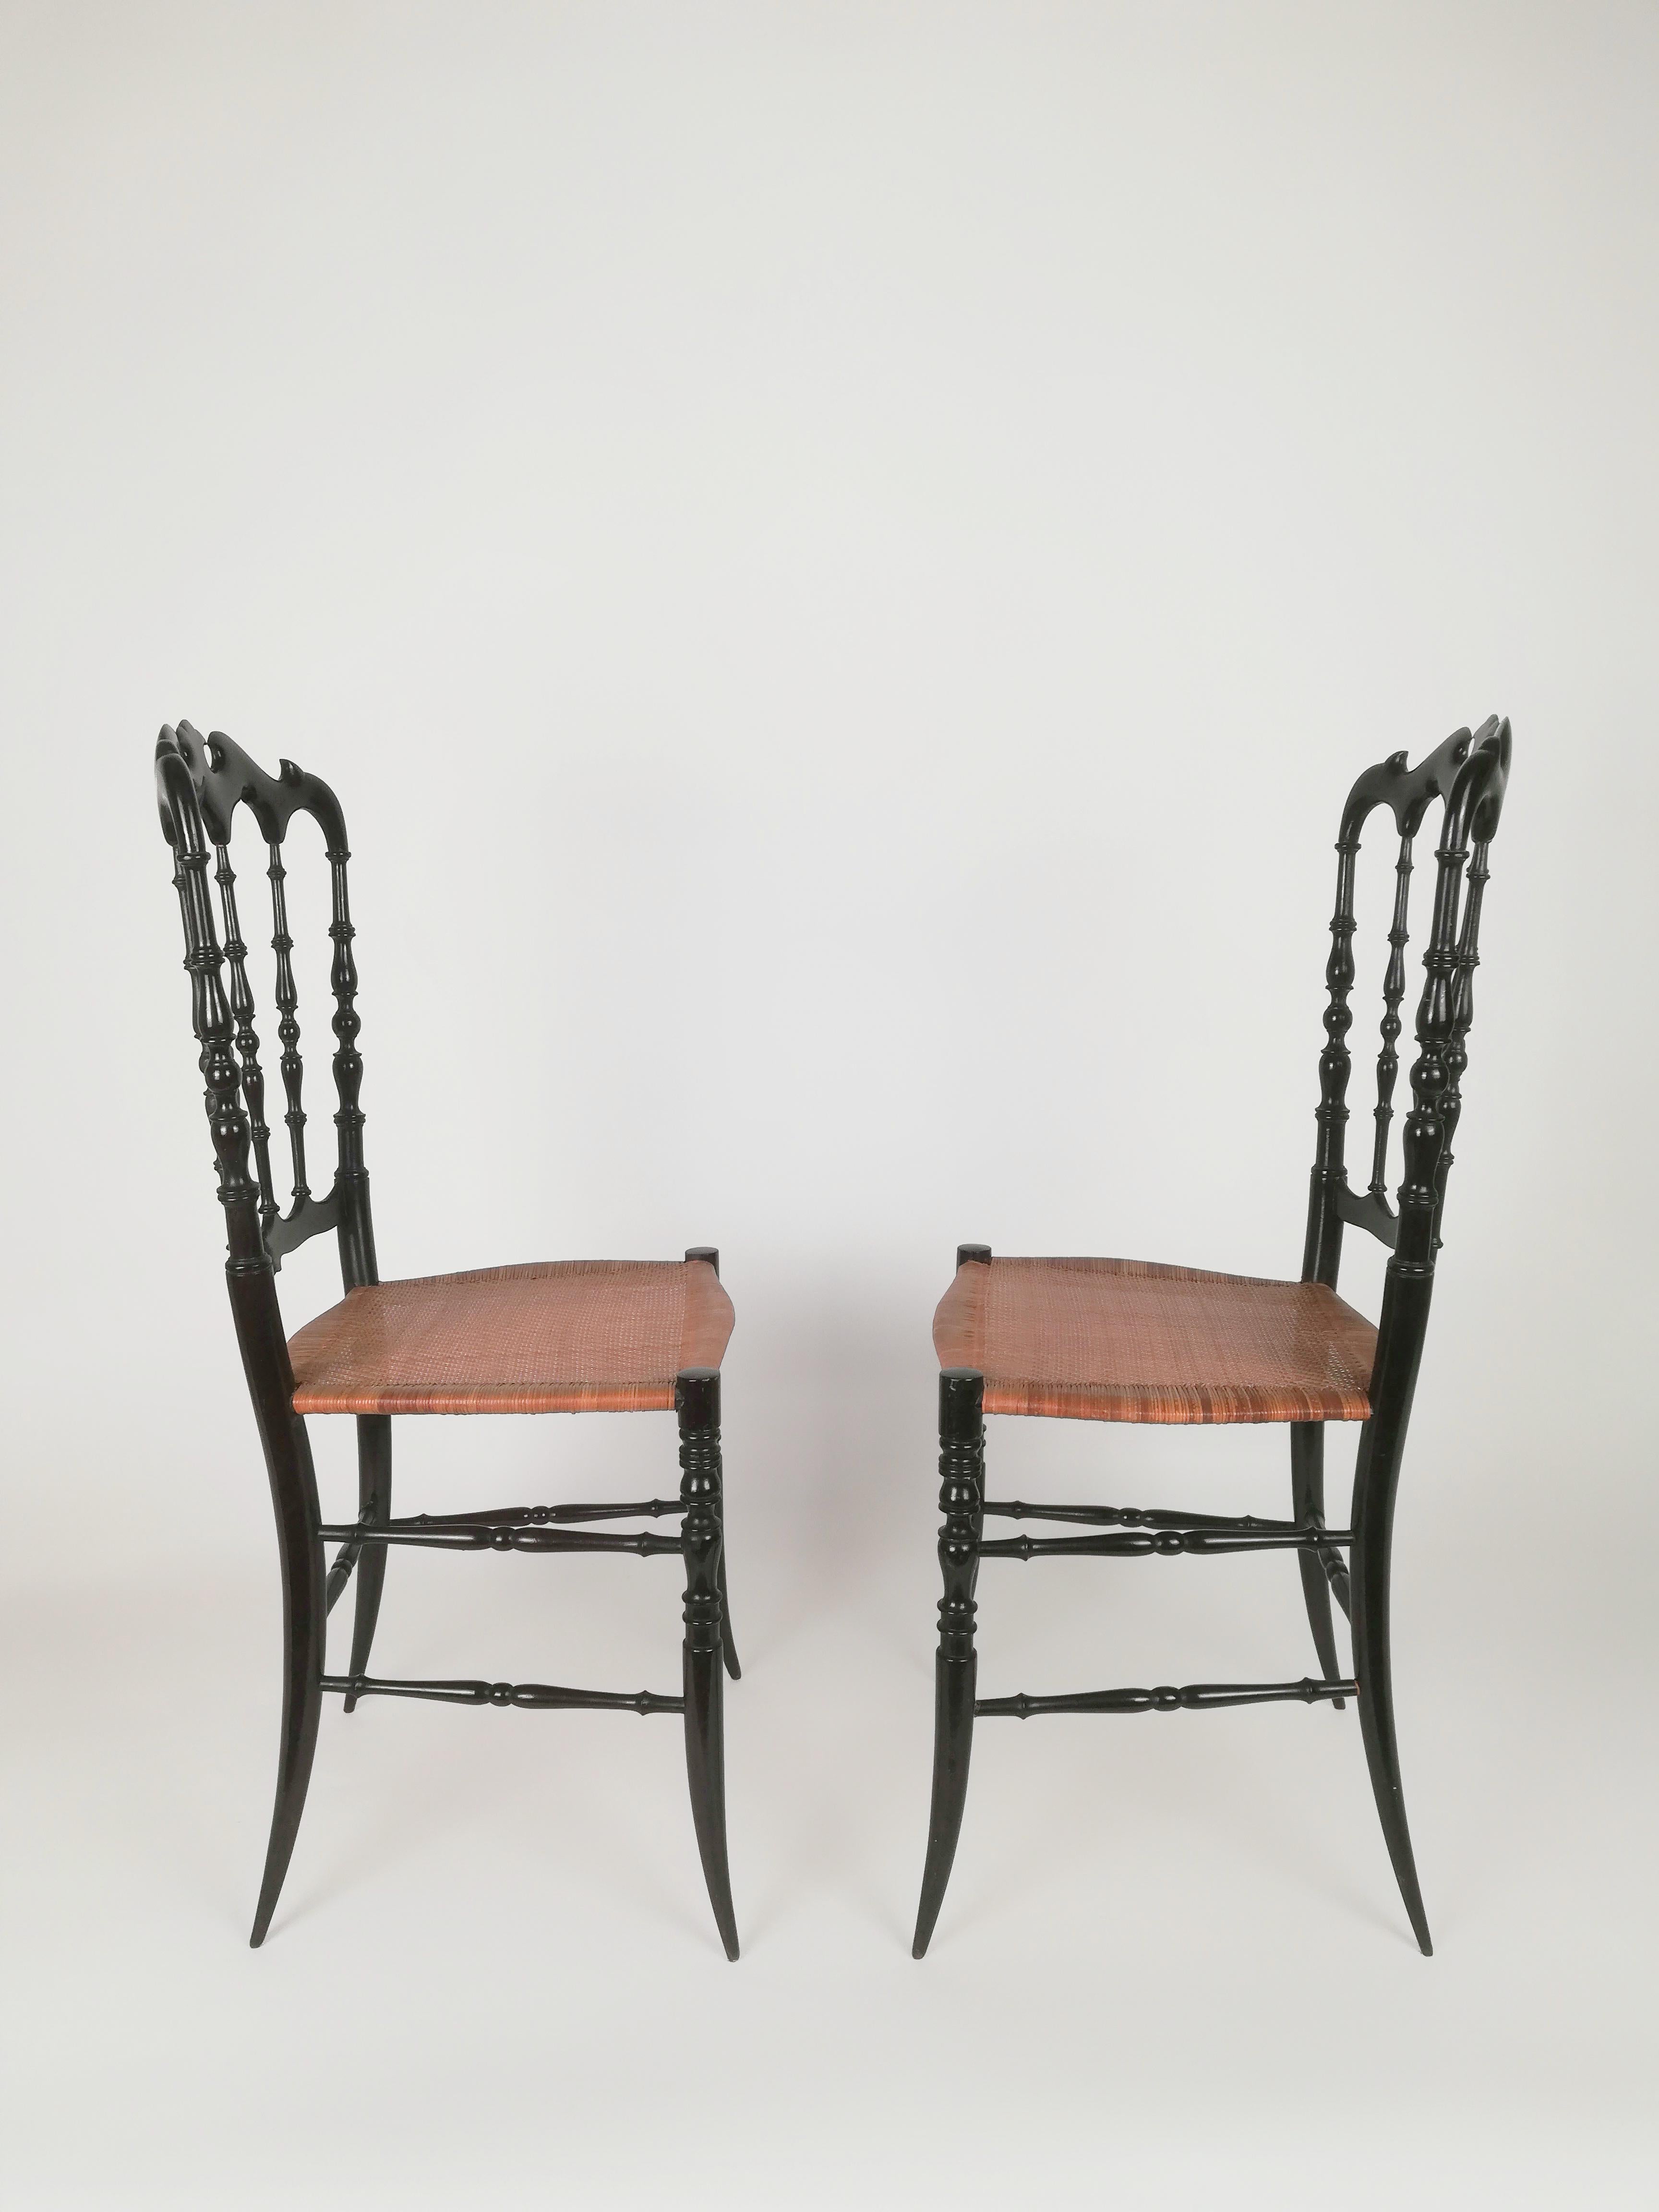 Carved Pair of Chiavarine Chairs Parisian Serie, in Super Light Black Wood and Straw